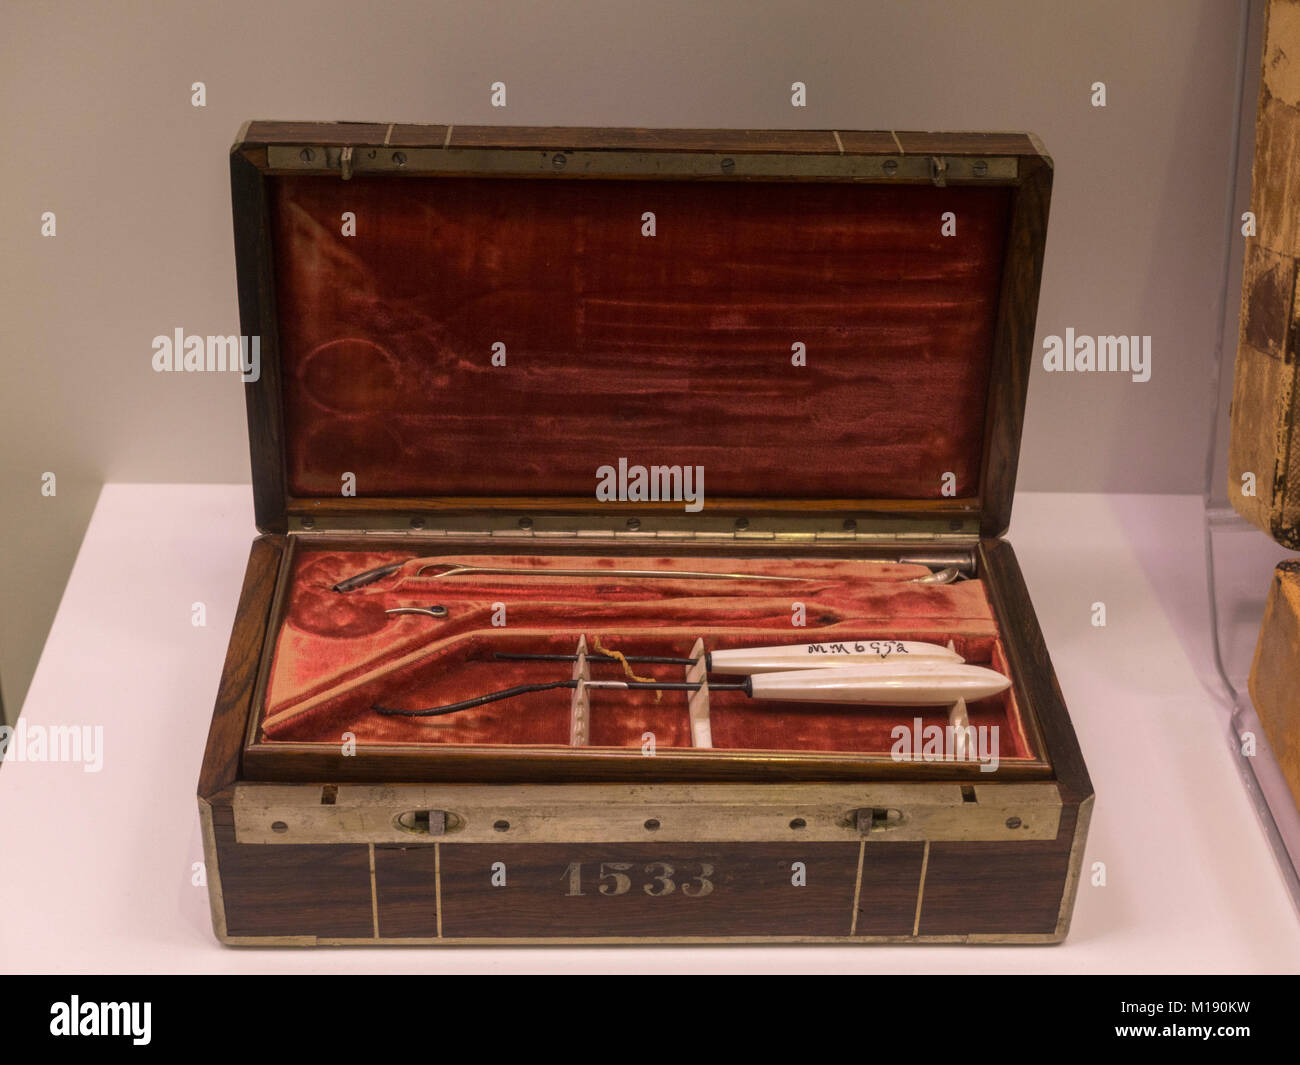 Civil War era case for Aural operations on display in the National Museum of Health and Medicine, Silver Spring, MD, USA. Stock Photo